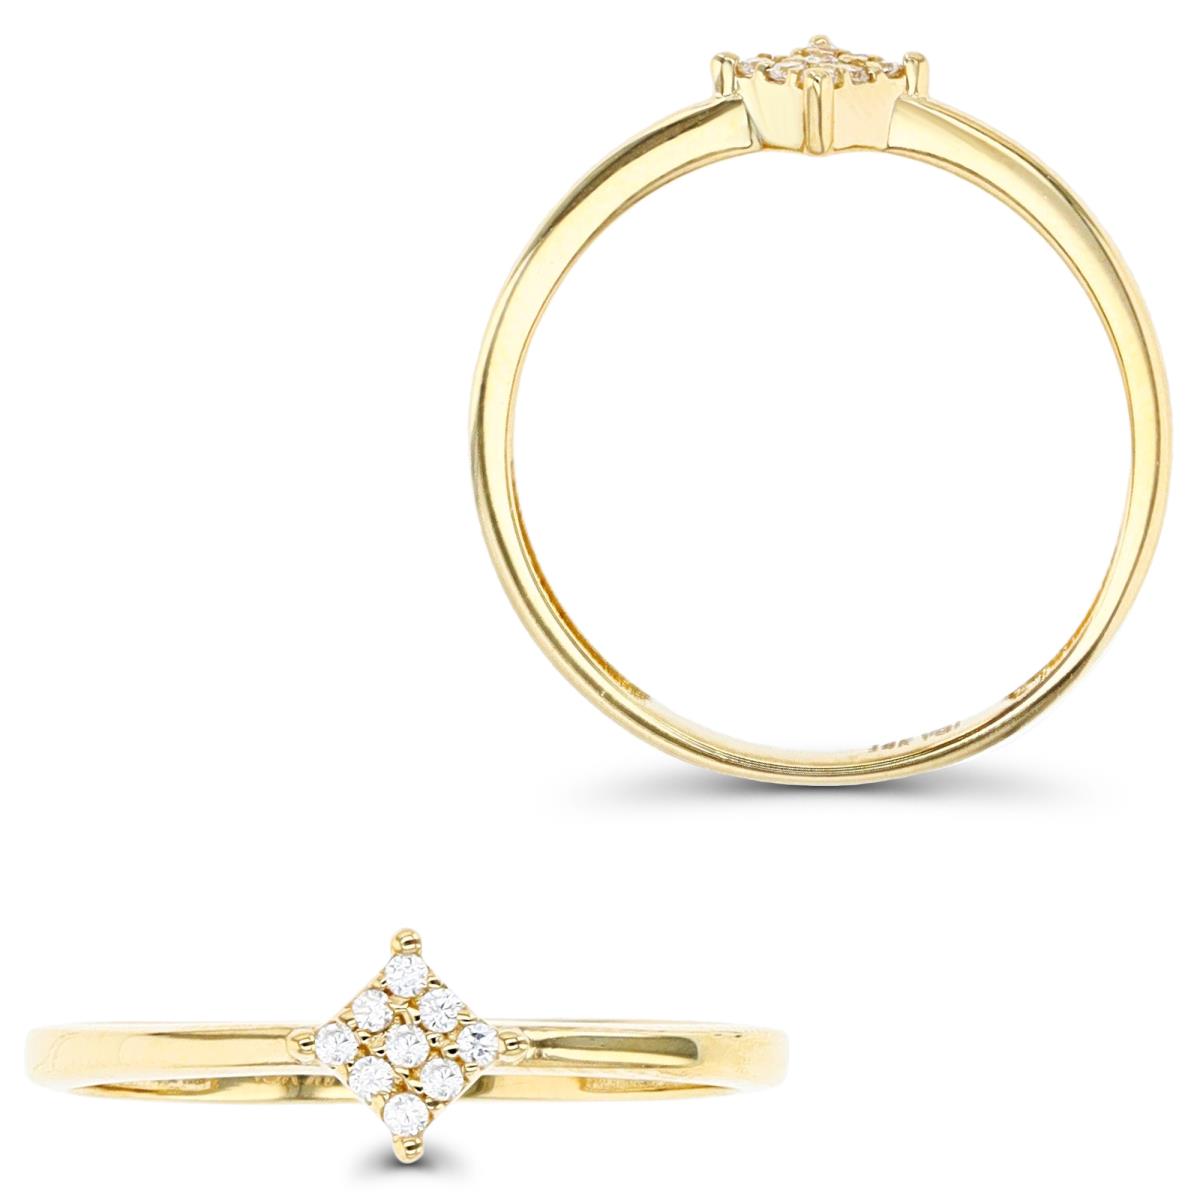 10K Yellow Gold Square Ring